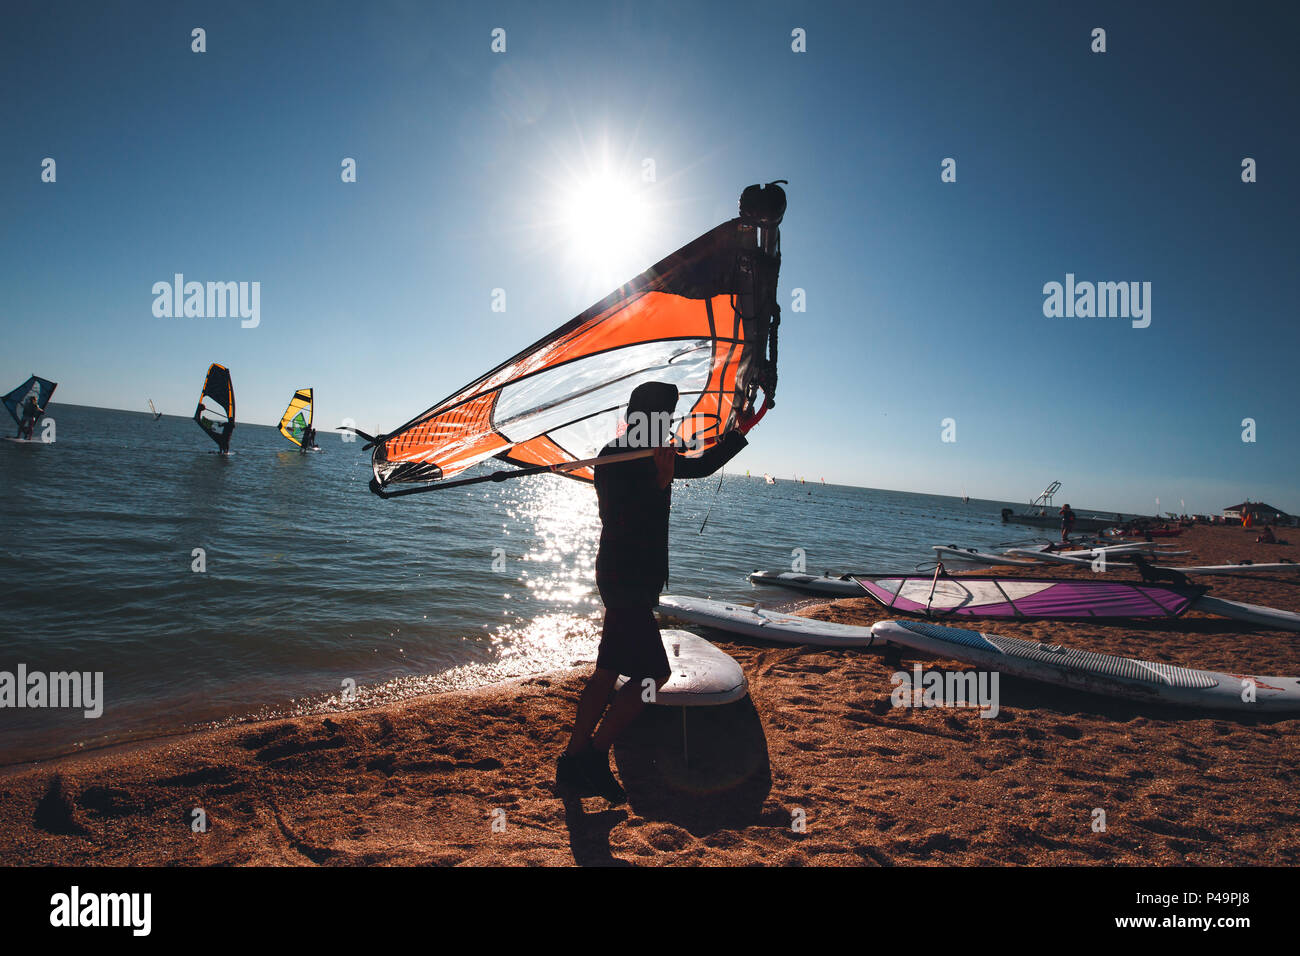 Windsurf boards on the sand at the beach. Windsurfing and active lifestyle. Stock Photo